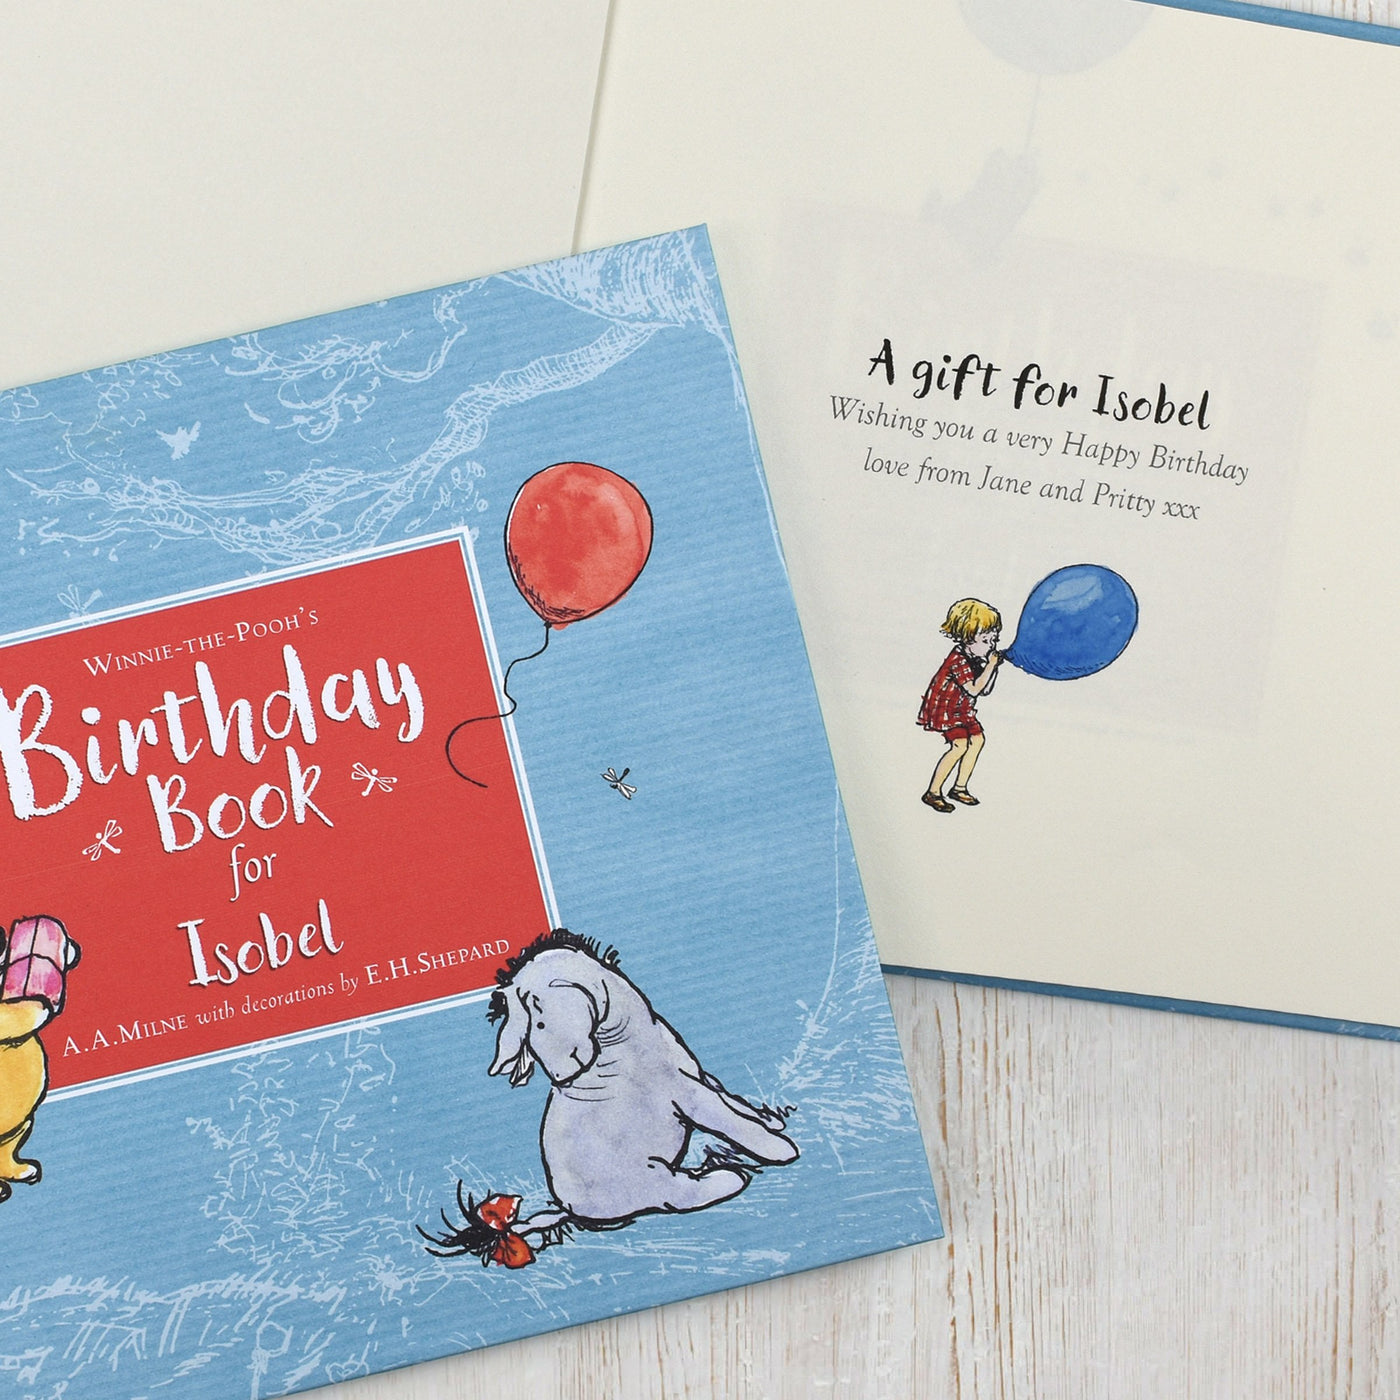 Personalised Winnie-the-Pooh Birthday Book - Shop Personalised Gifts